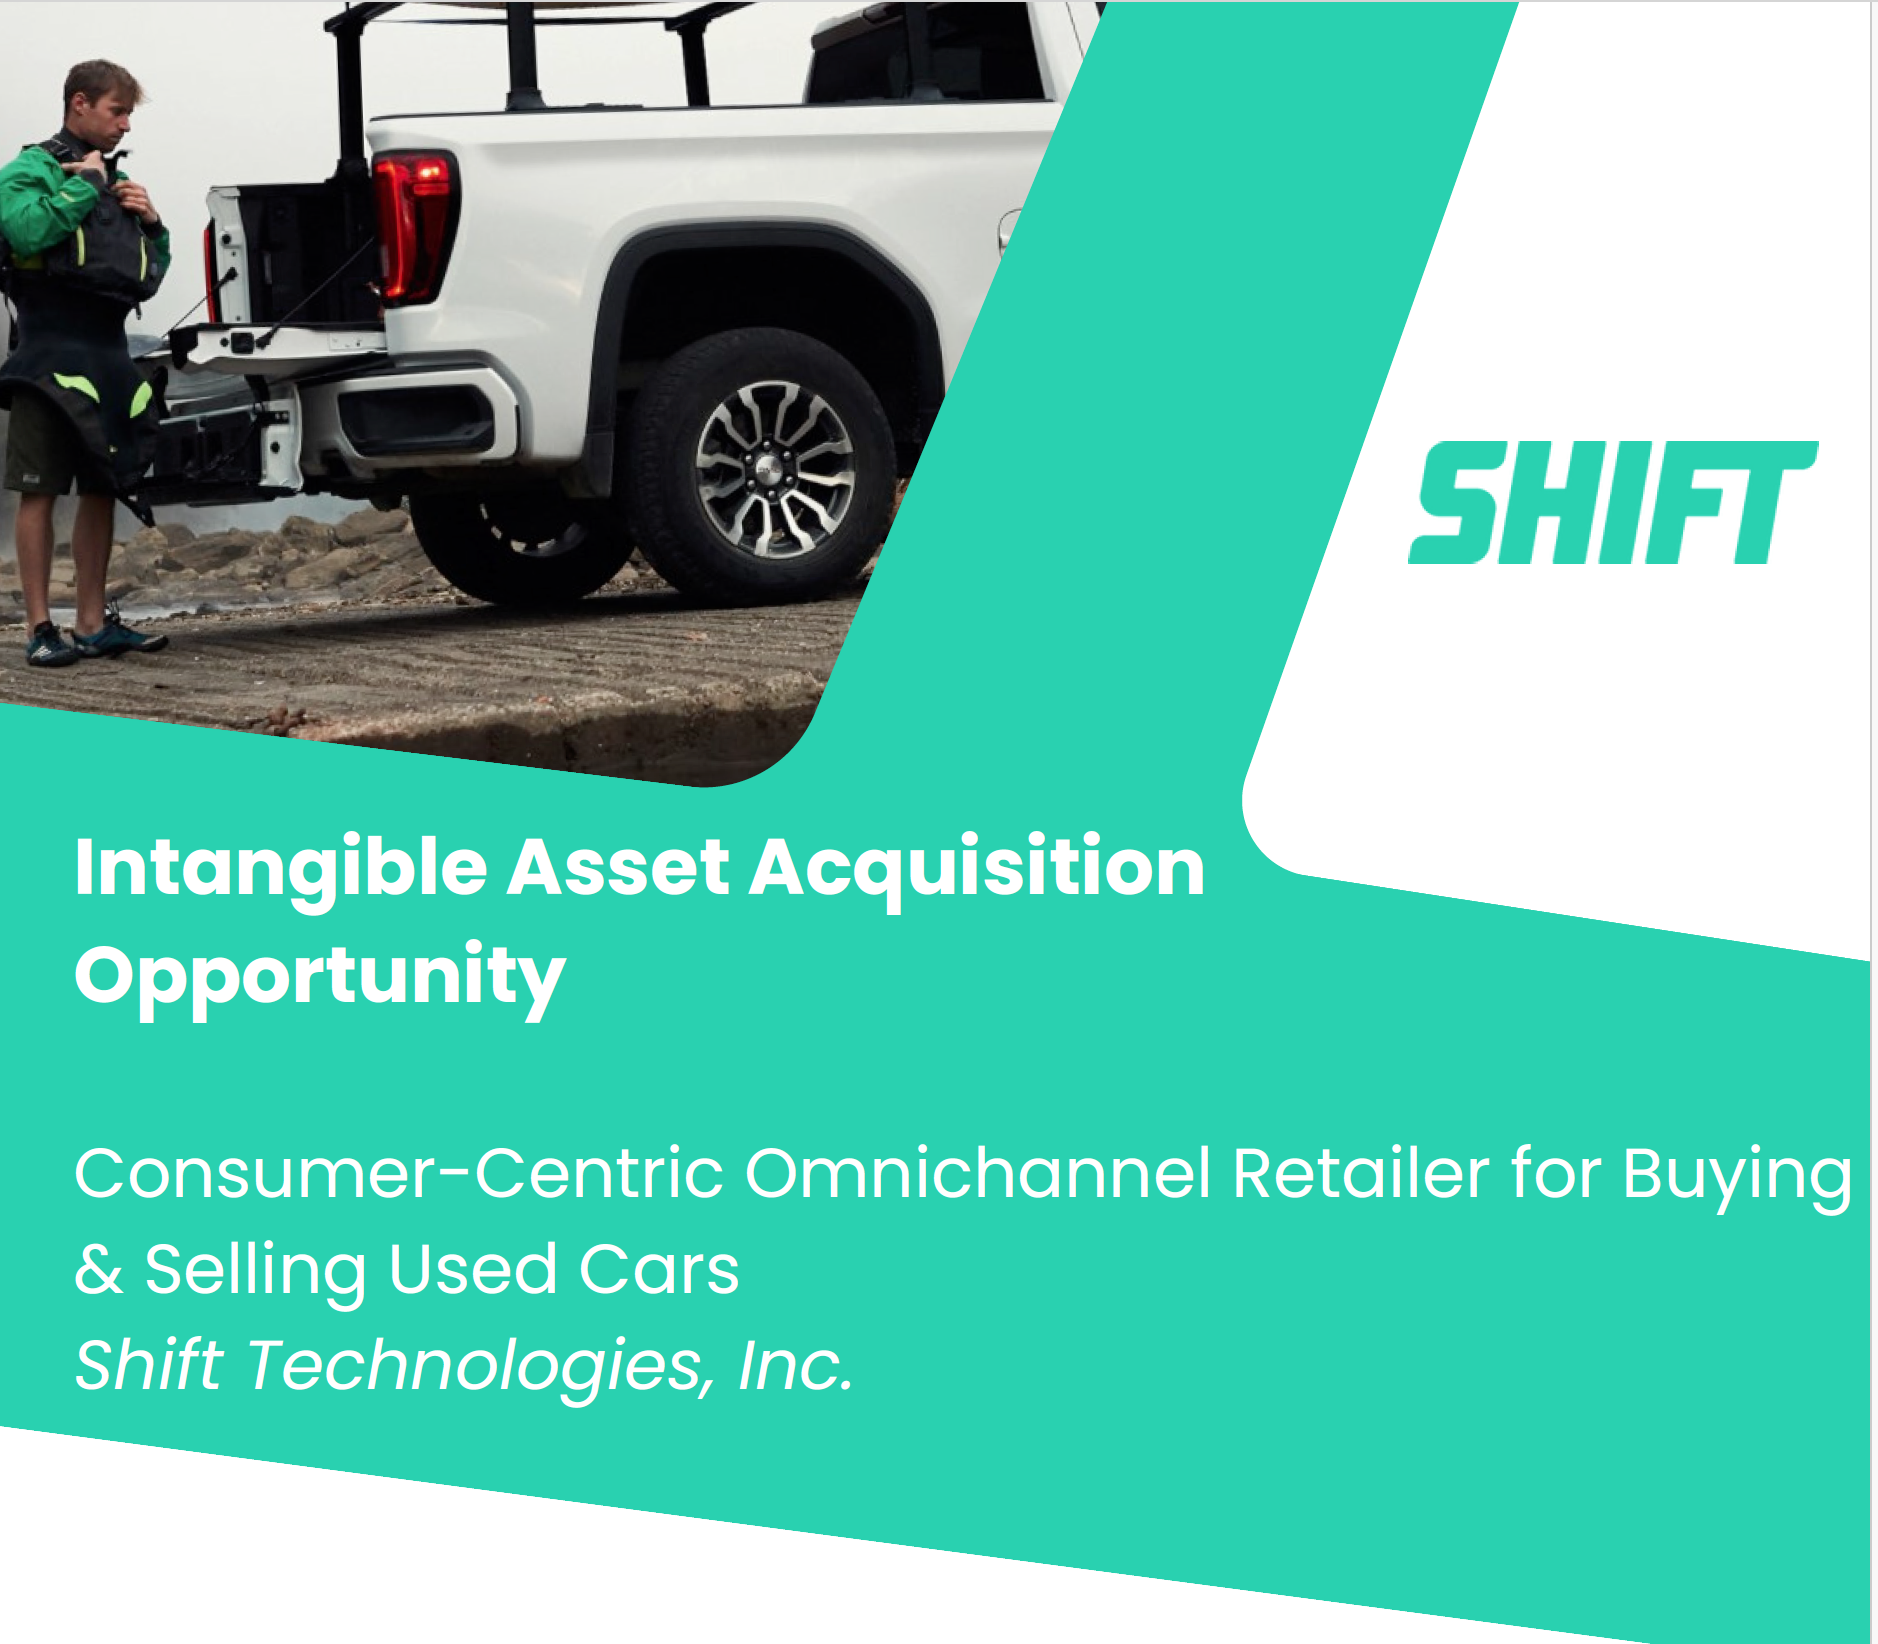 Hilco Streambank Overseeing Intellectual Property Sale of Shift Technologies, Inc. Consumer-Centric Omnichannel Retailer for Buying & Selling Used Cars